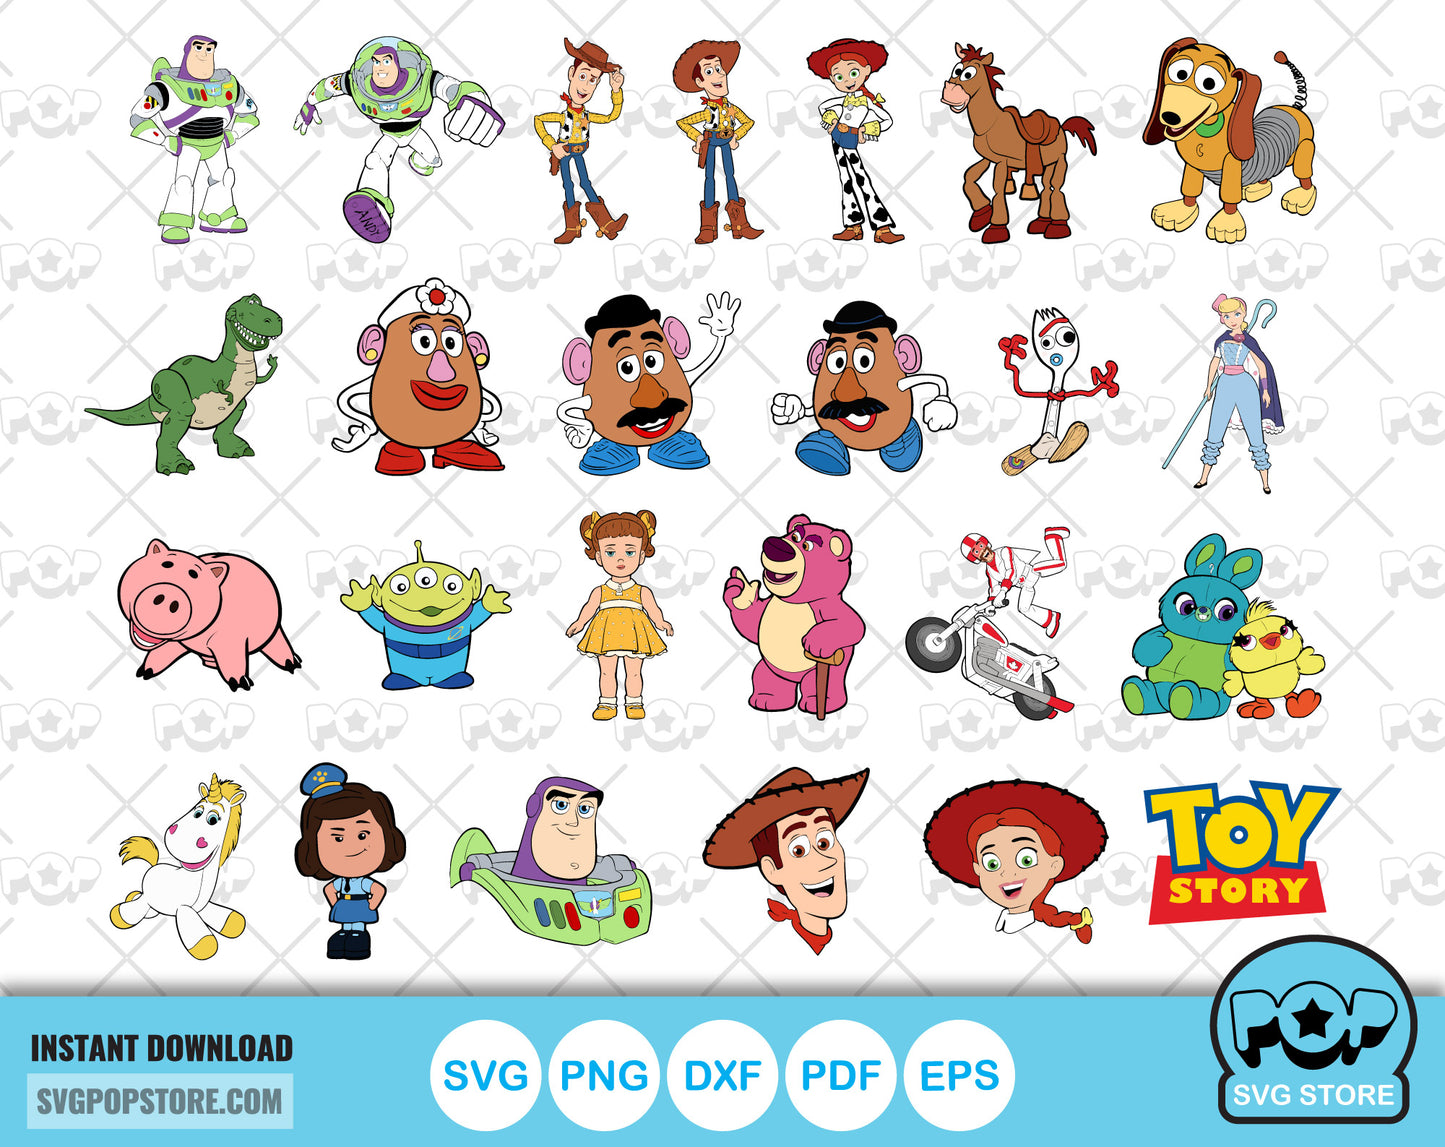 Toy Story clipart bundle + alphabet, Toy Story svg cut files for Cricut / Silhouette, Toy Story png